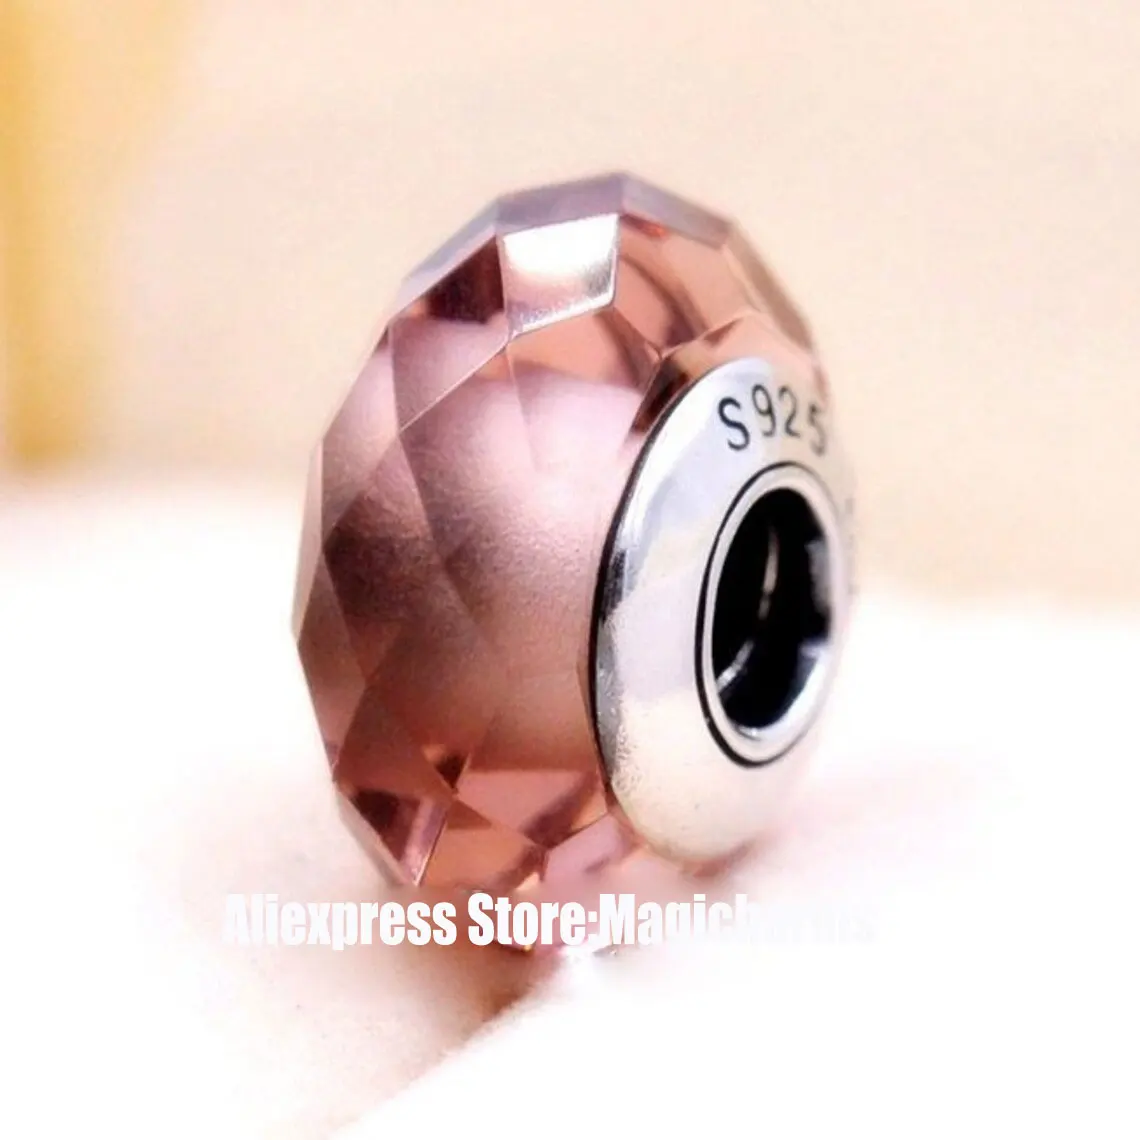 

925 Sterling Silver Blush Pink Fascinating Faceted Murano Glass Charm Bead For Pandora European Jewelry Bracelet